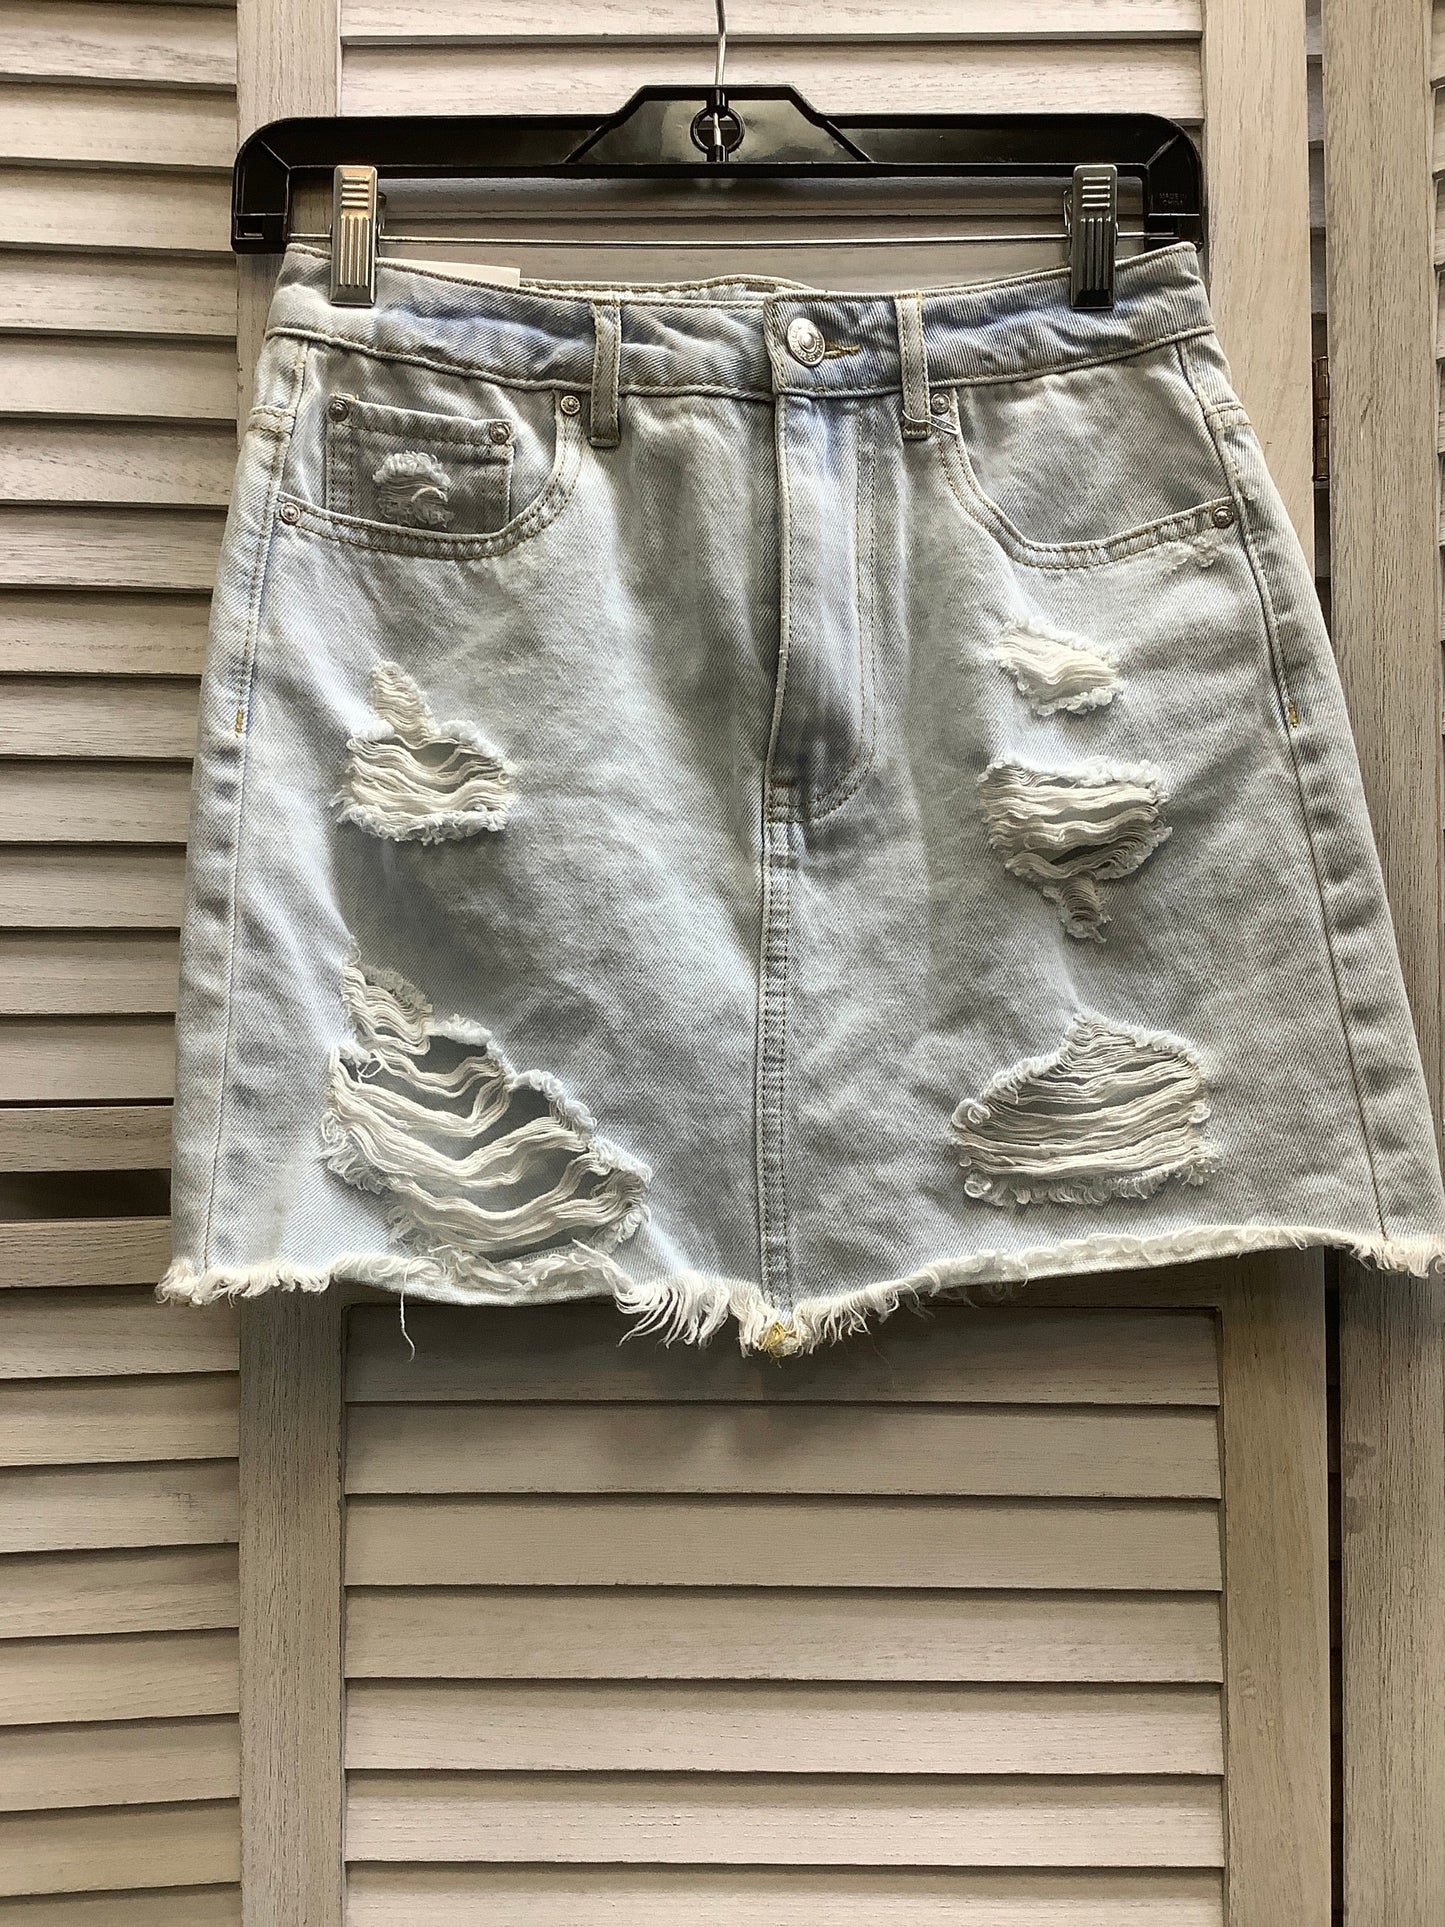 Skirt mini and short by Forever 21, Size S